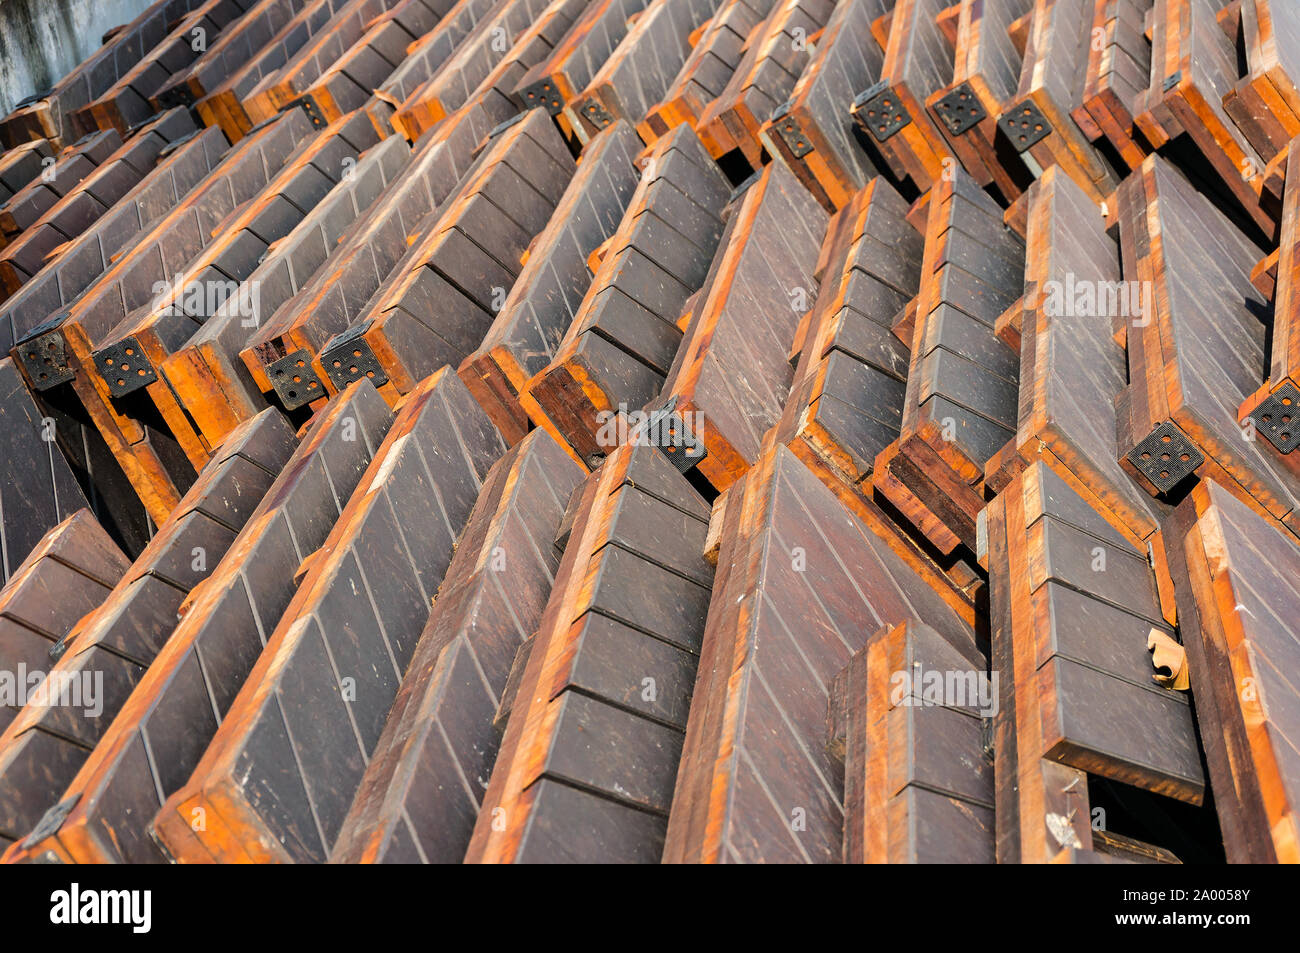 Construction material- stack of wood planks, boards. Stack of old wooden pallets Stock Photo